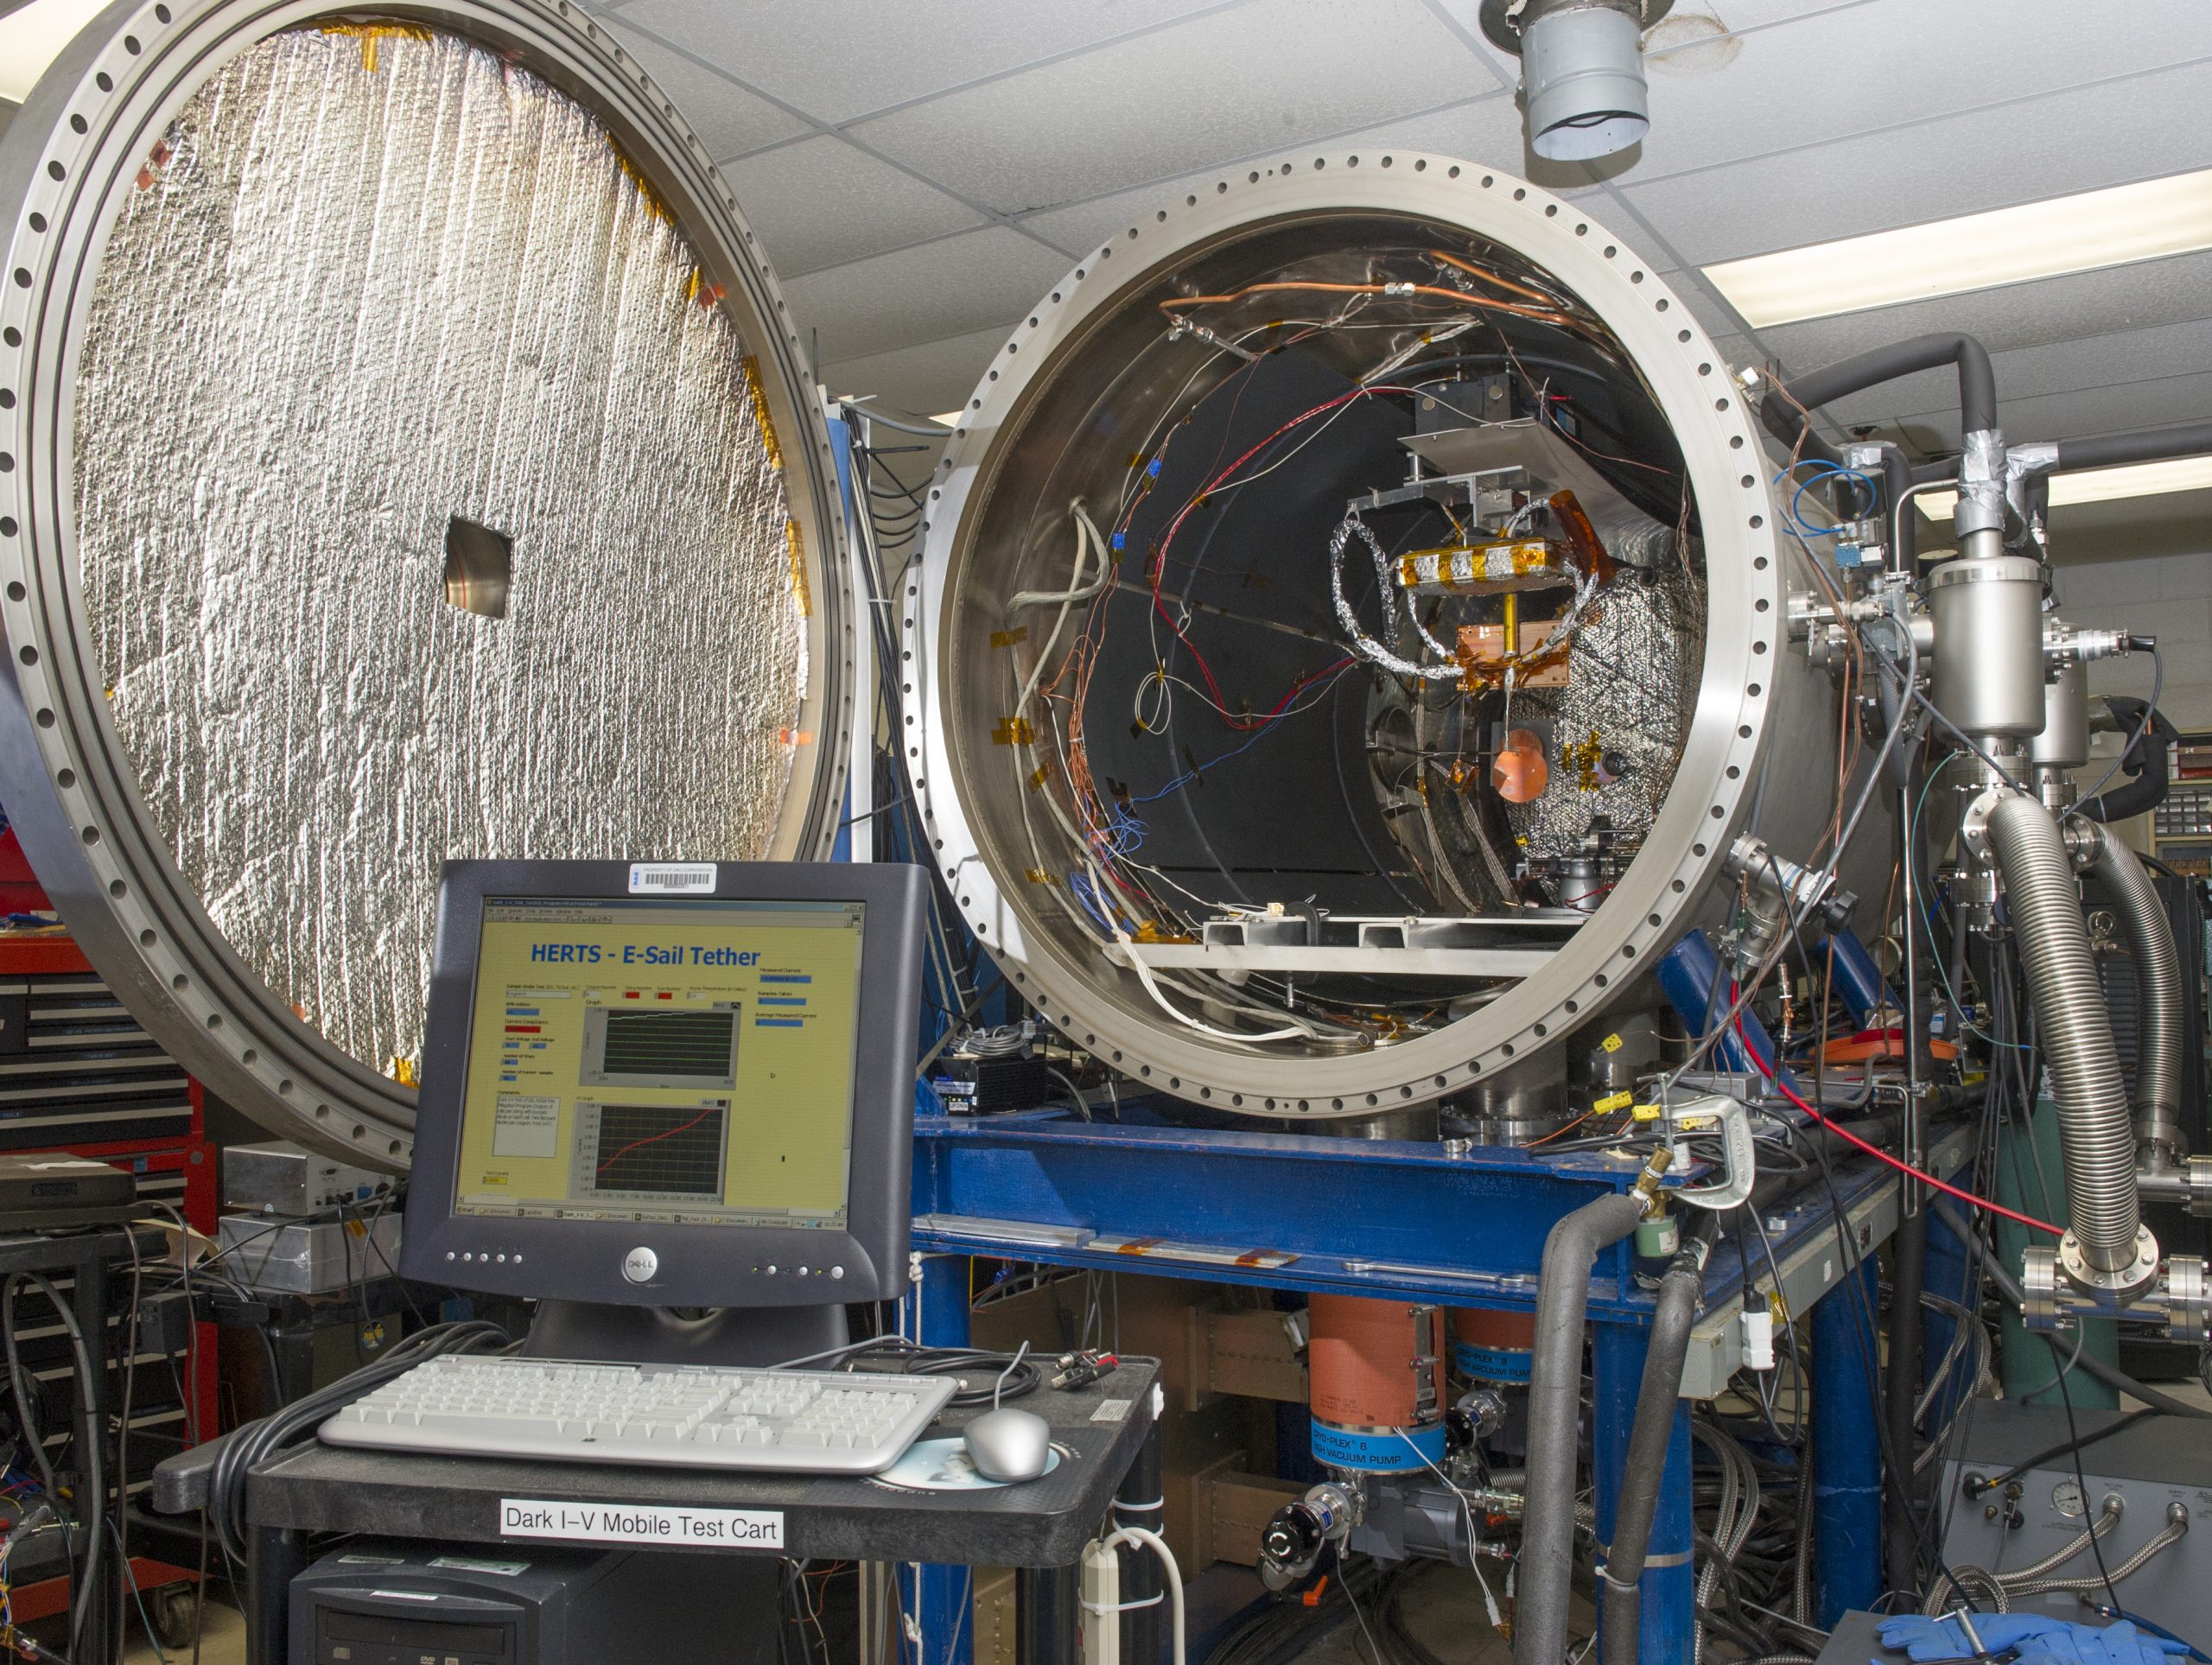 Tests within a controlled plasma chamber will examine the rate of proton and electron collisions with a positively charged wire. Results will help improve modeling data that will be applied to future development of E-Sail technology.